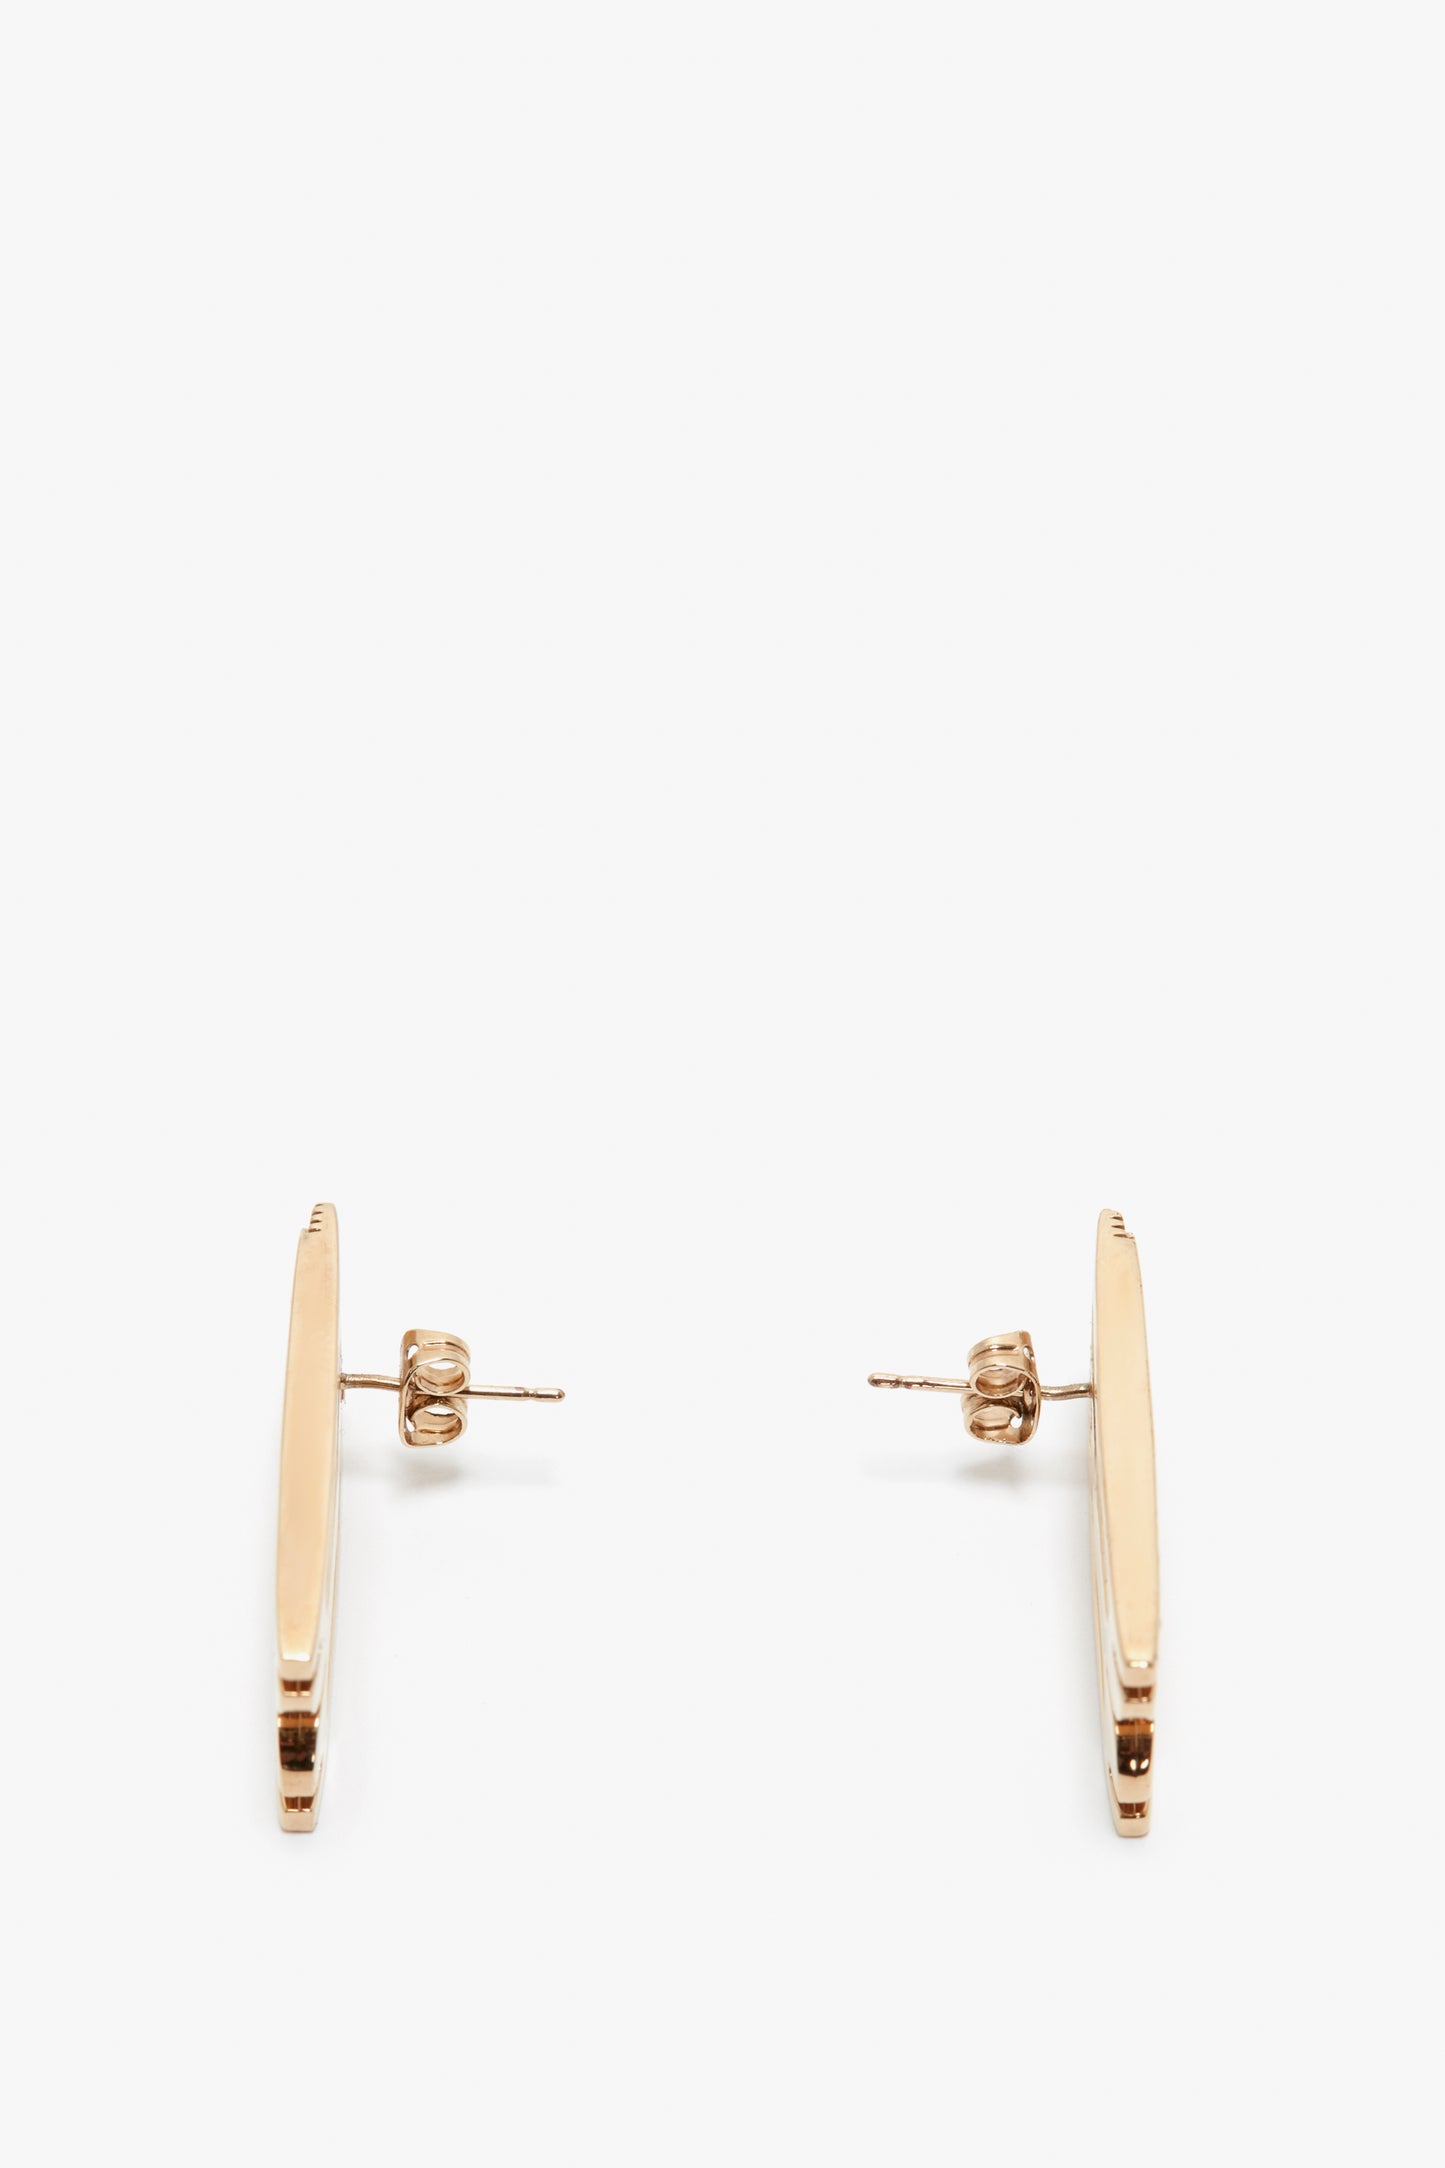 A pair of Victoria Beckham Exclusive Frame Stud Earrings in Gold plated brass bar earrings isolated on a white background.